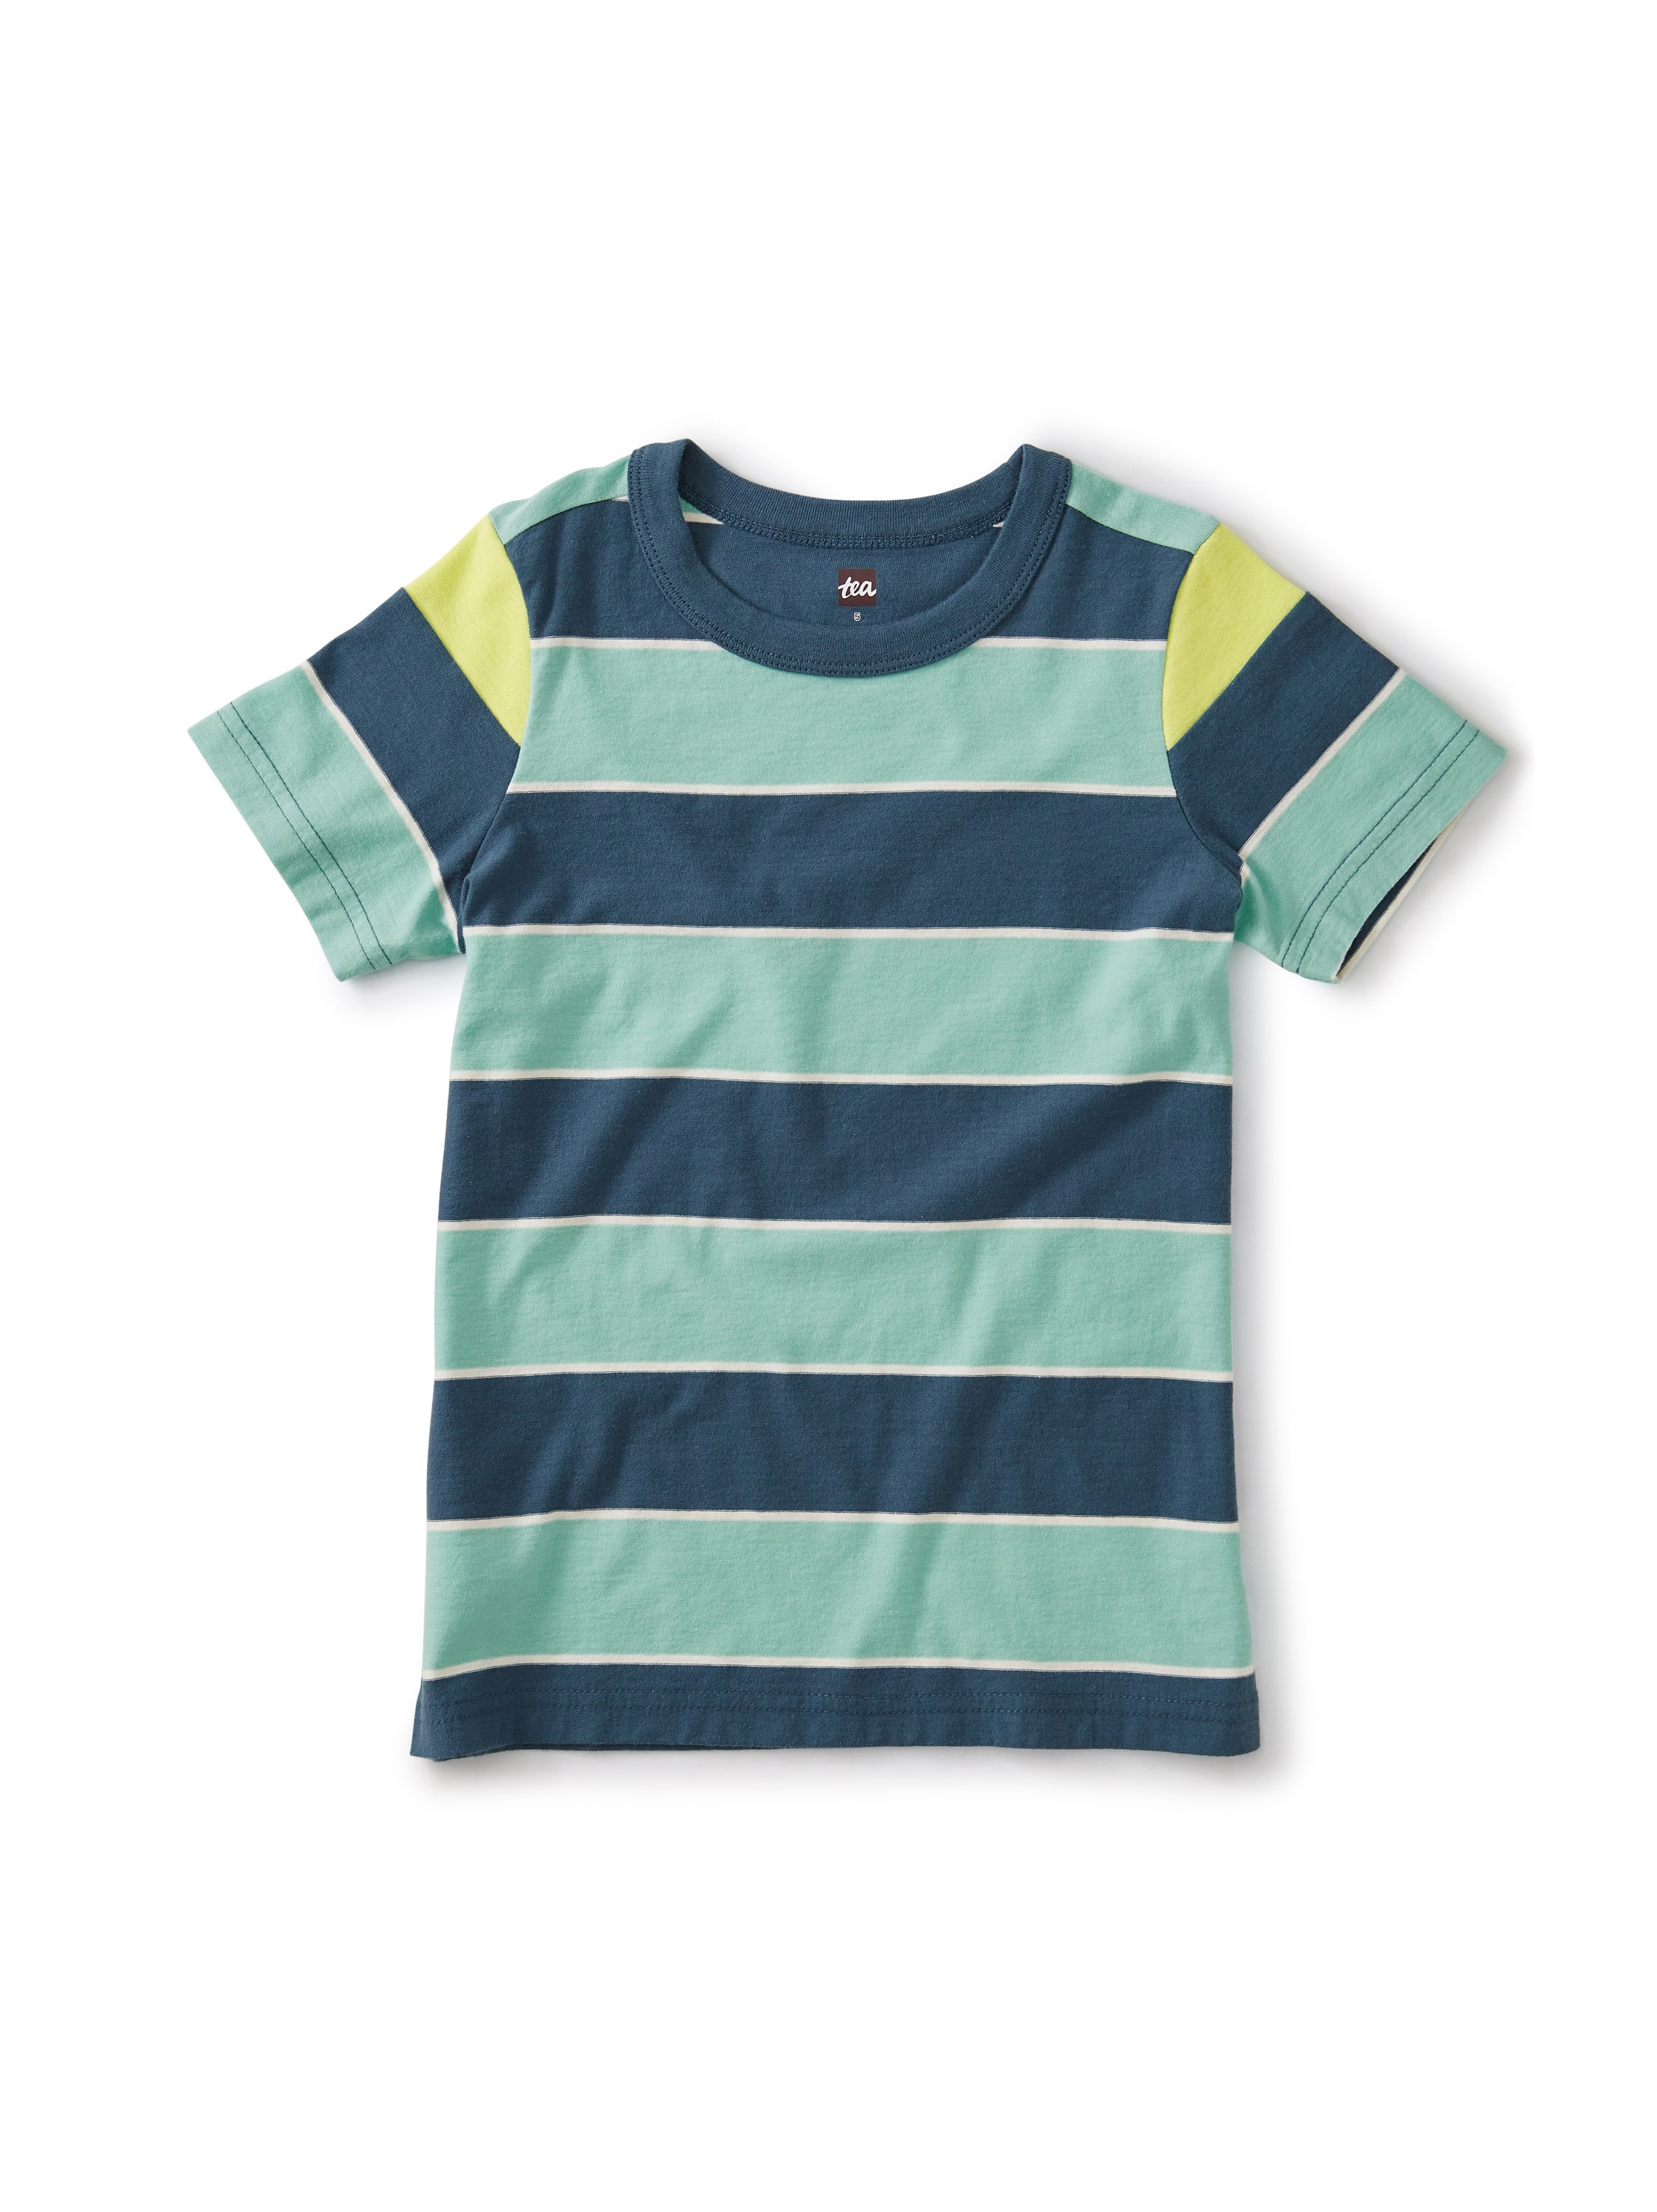 Striped Shoulder Inset Tee | Tea Collection